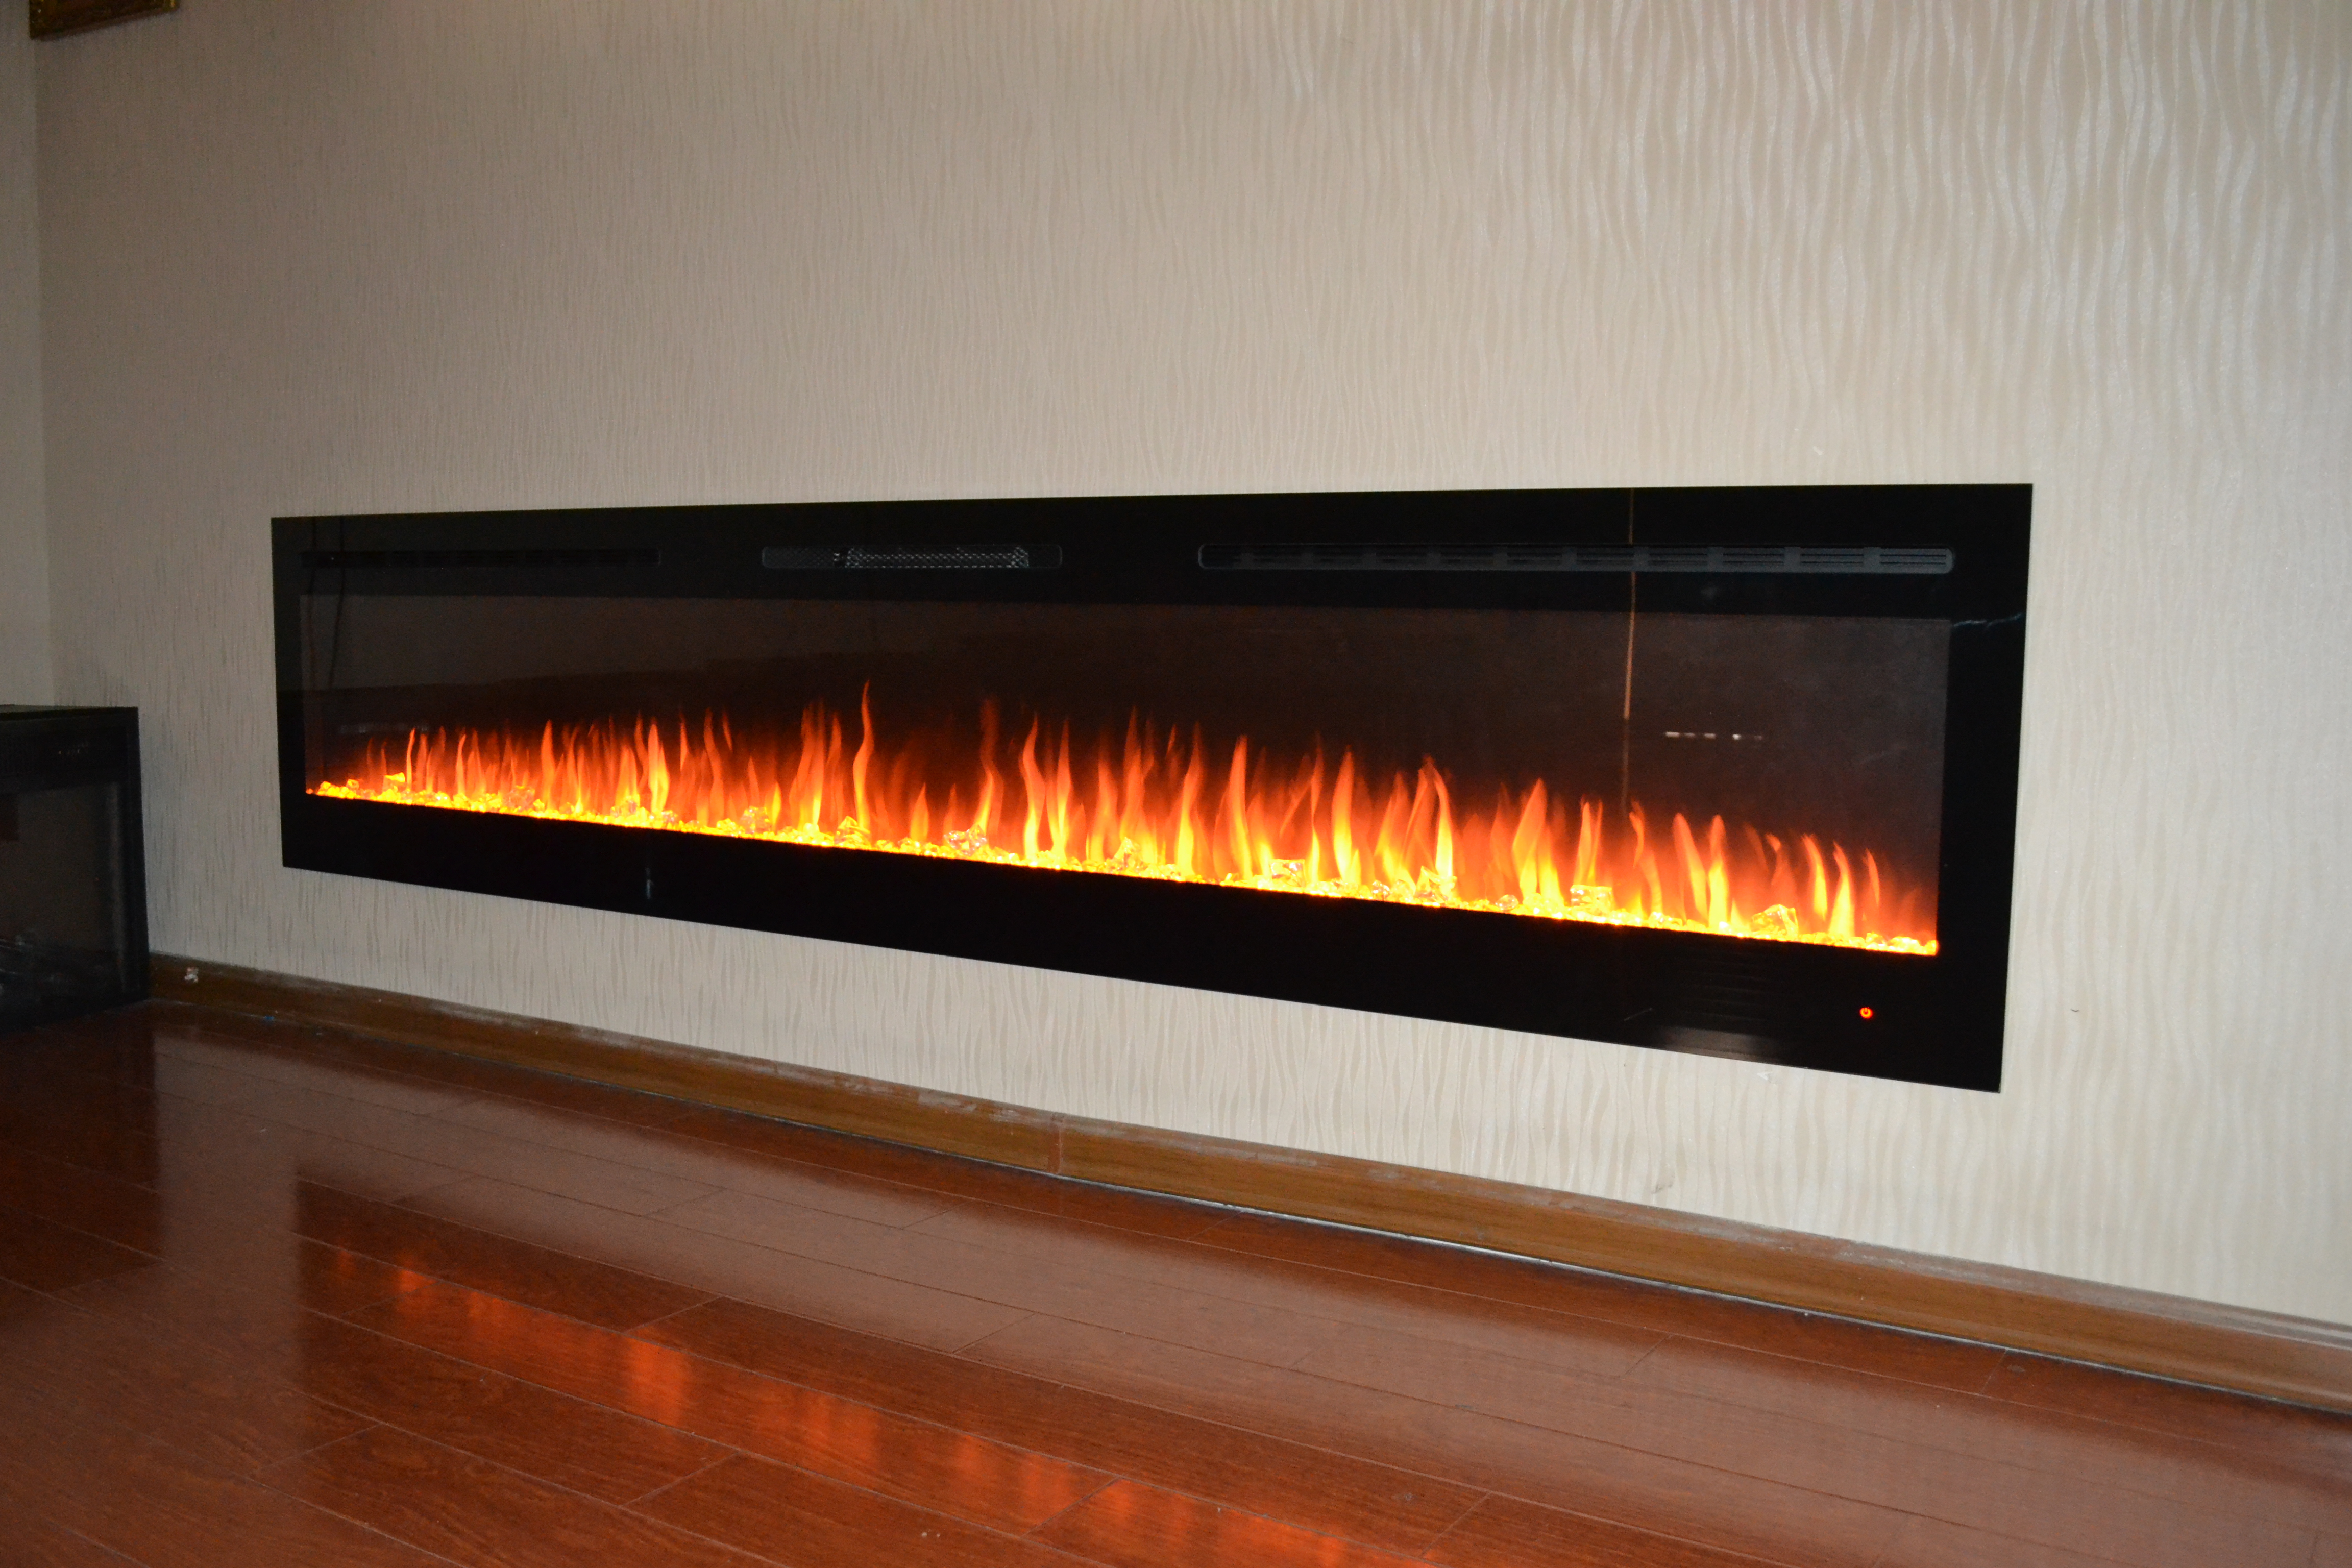 72inch large Black Wall Mounted Electric Fire with 3 colour Flames and can be inset crystals and orange flames